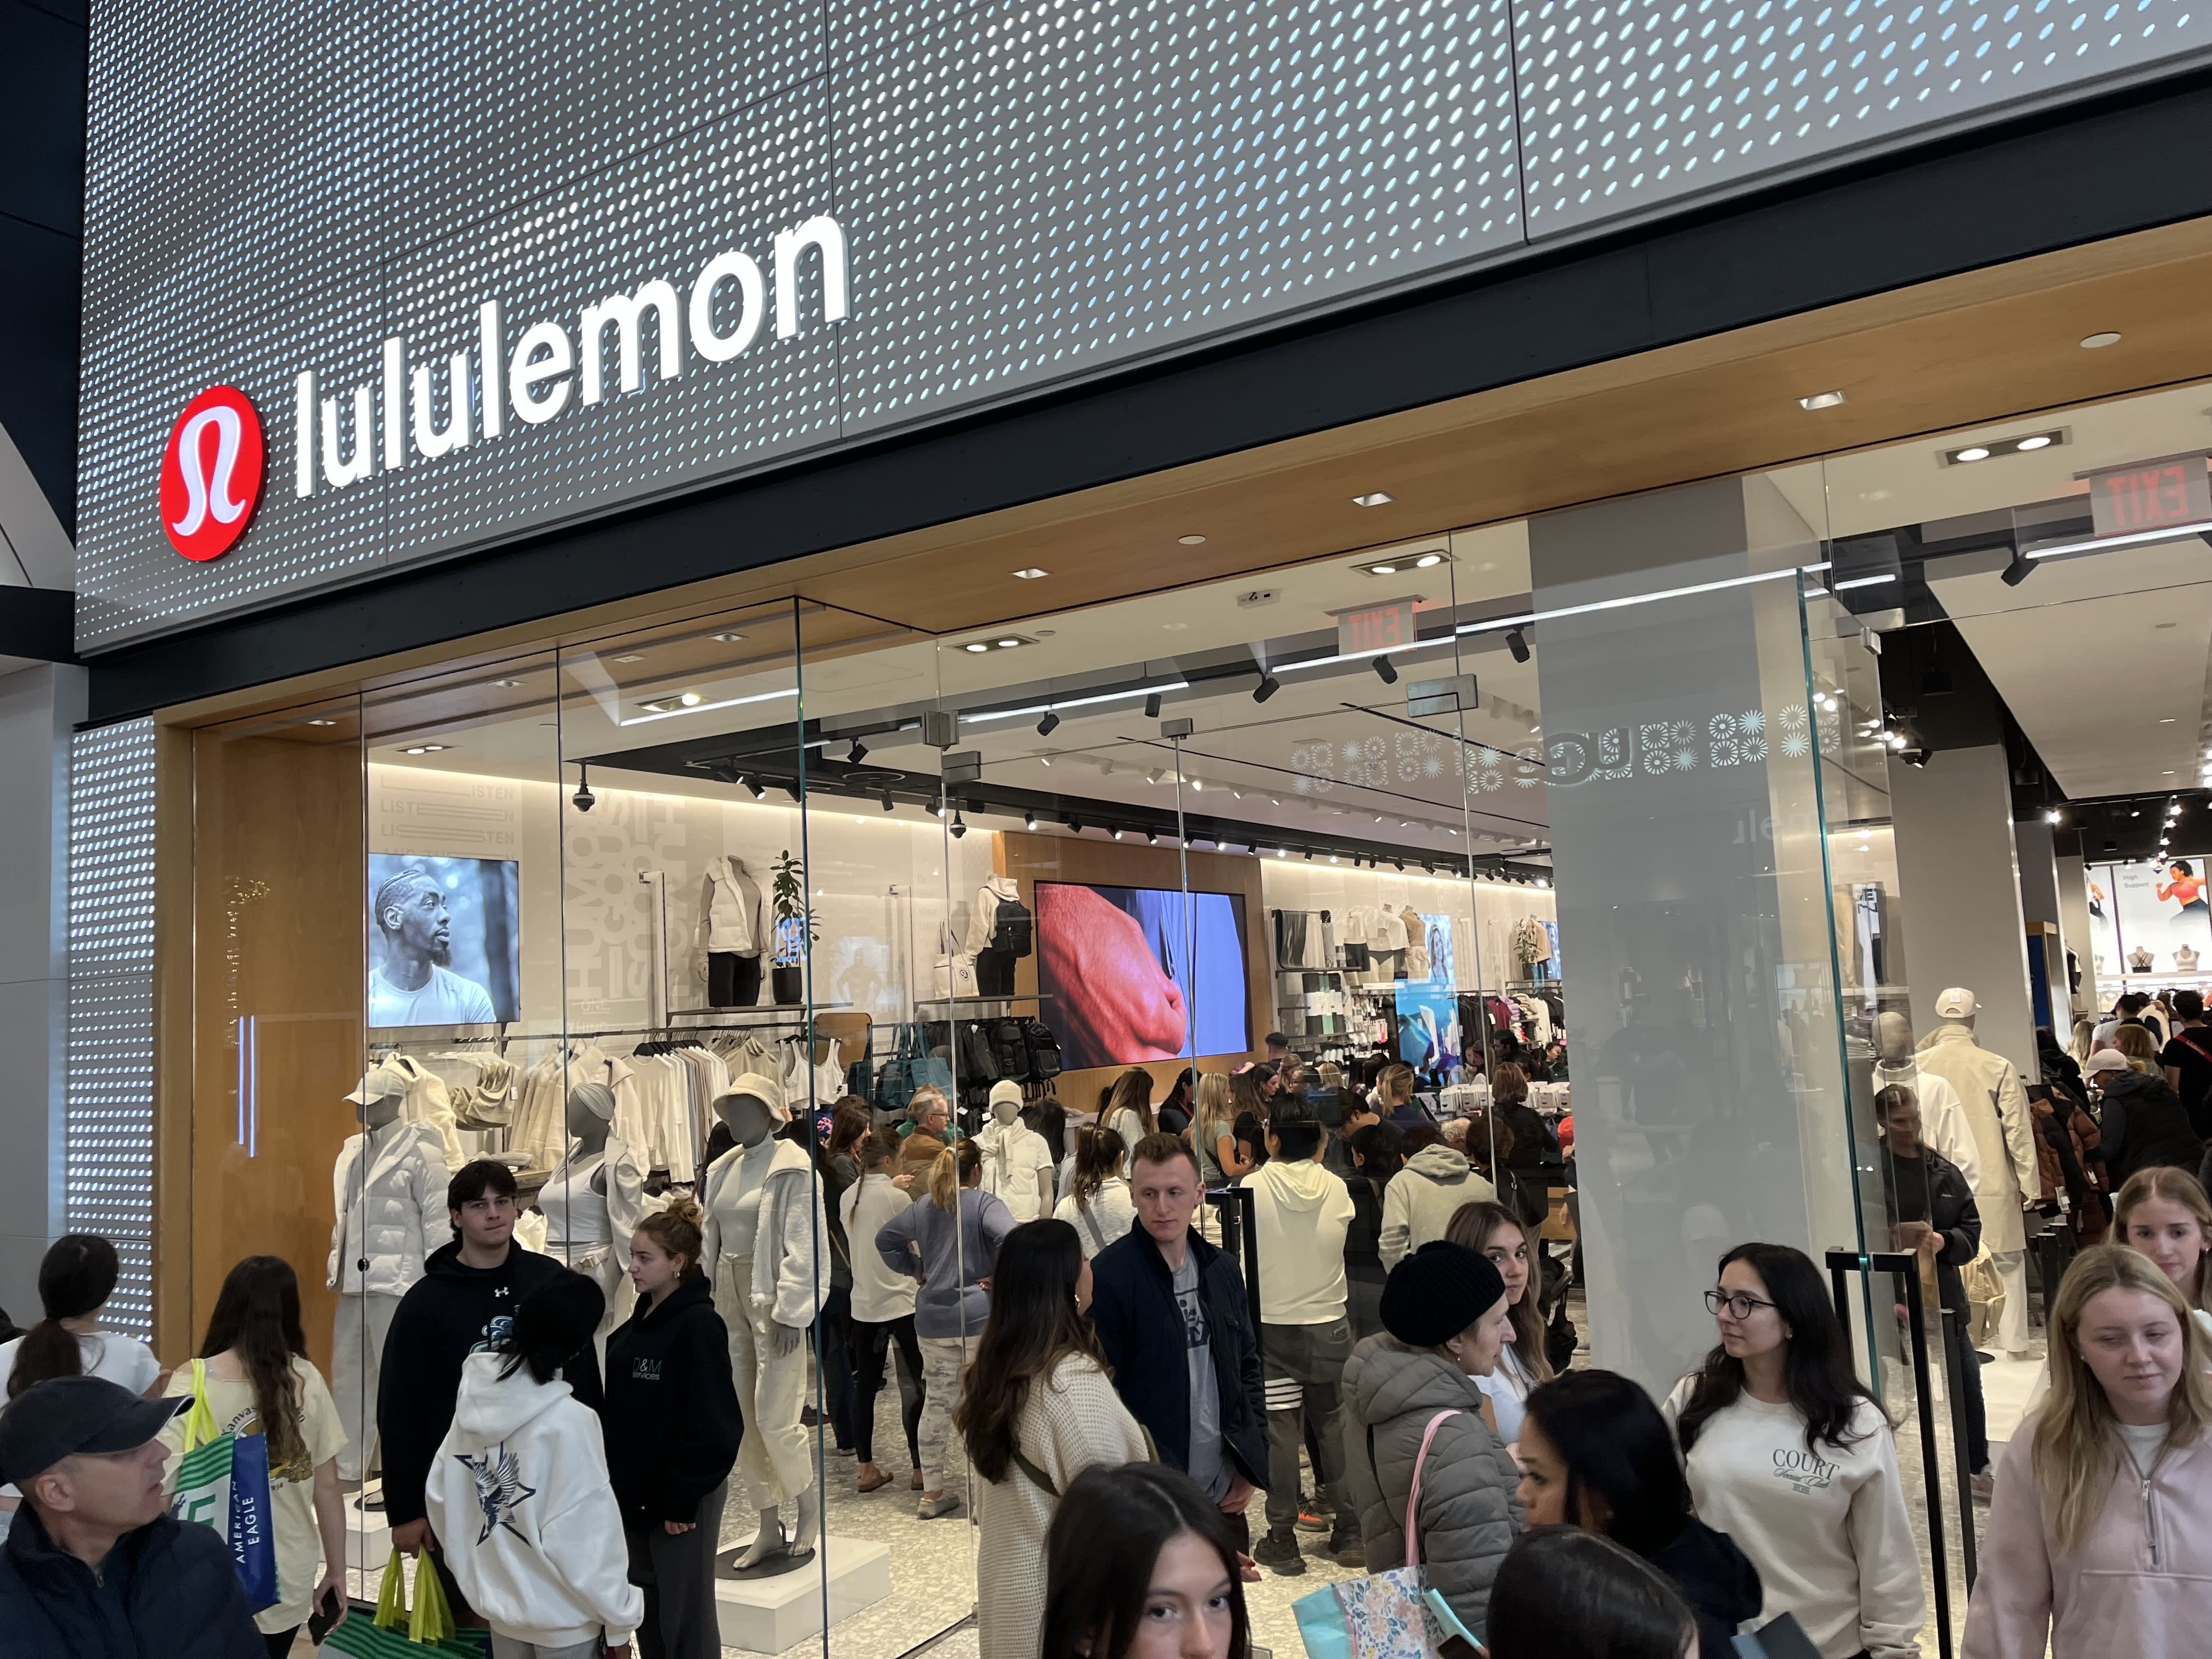 Lululemon Athletica's Q4 Earnings to Grow Nearly 9%, Revenue About 19%